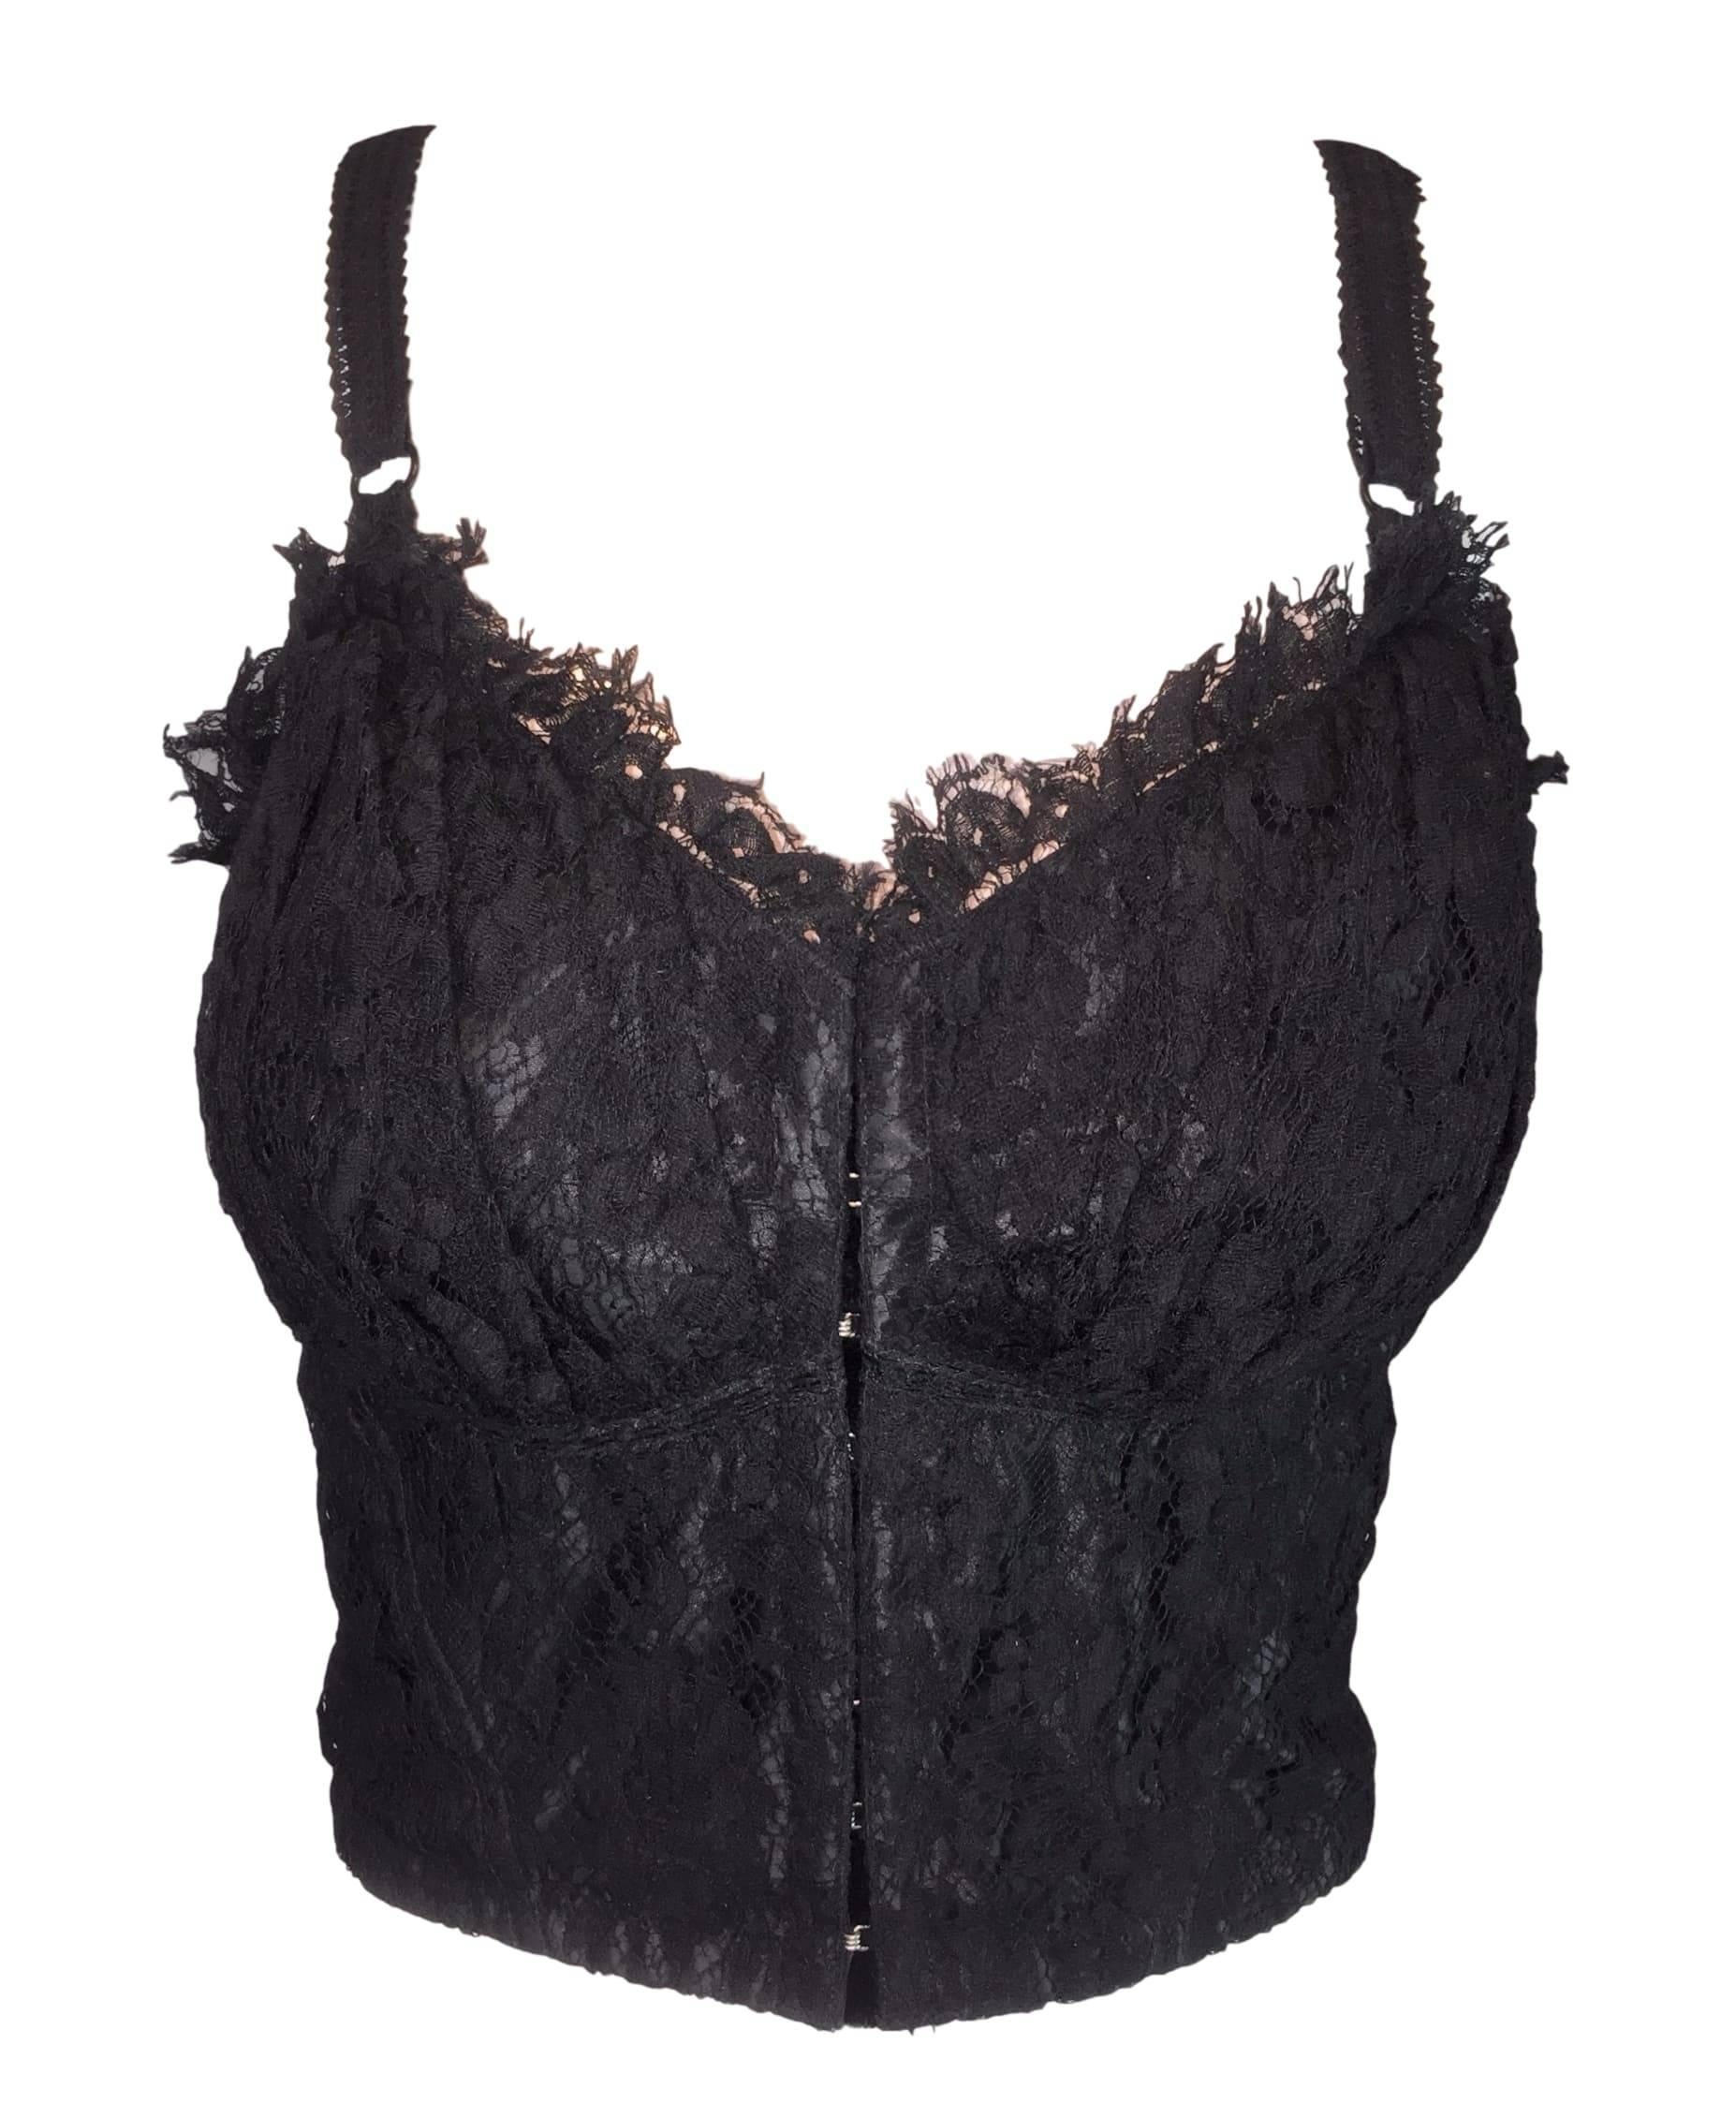 S/S 1992 Dolce & Gabbana Black Lace Corset Bustier Top & High Waisted Mini Skirt In Excellent Condition In Yukon, OK